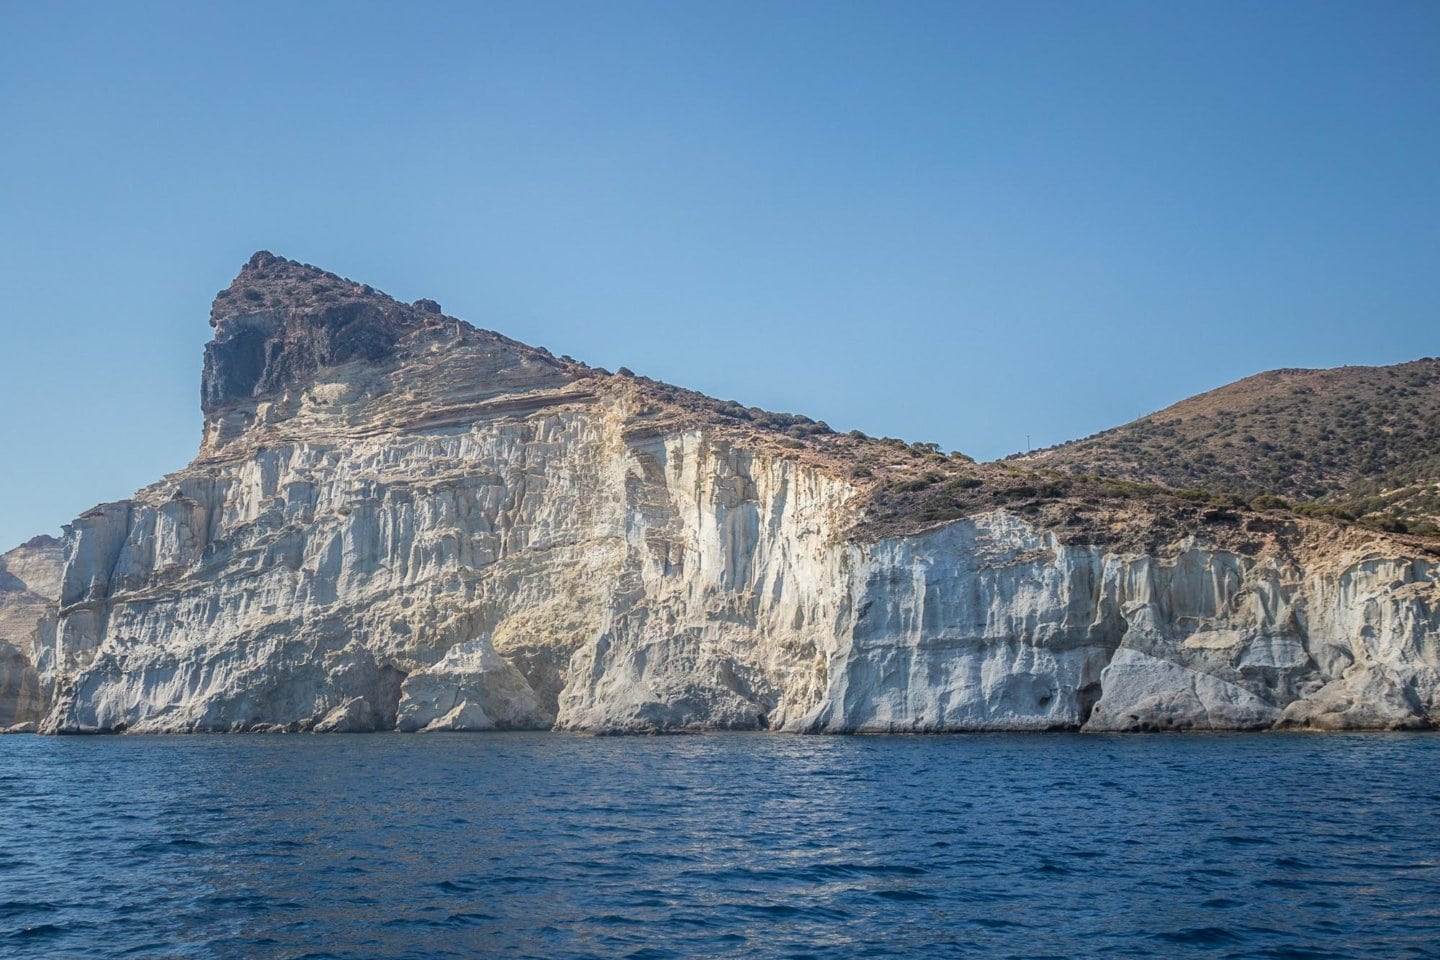 Rock formations near Gerontas beach on Milos island. Seen in passing during a sailing trip.